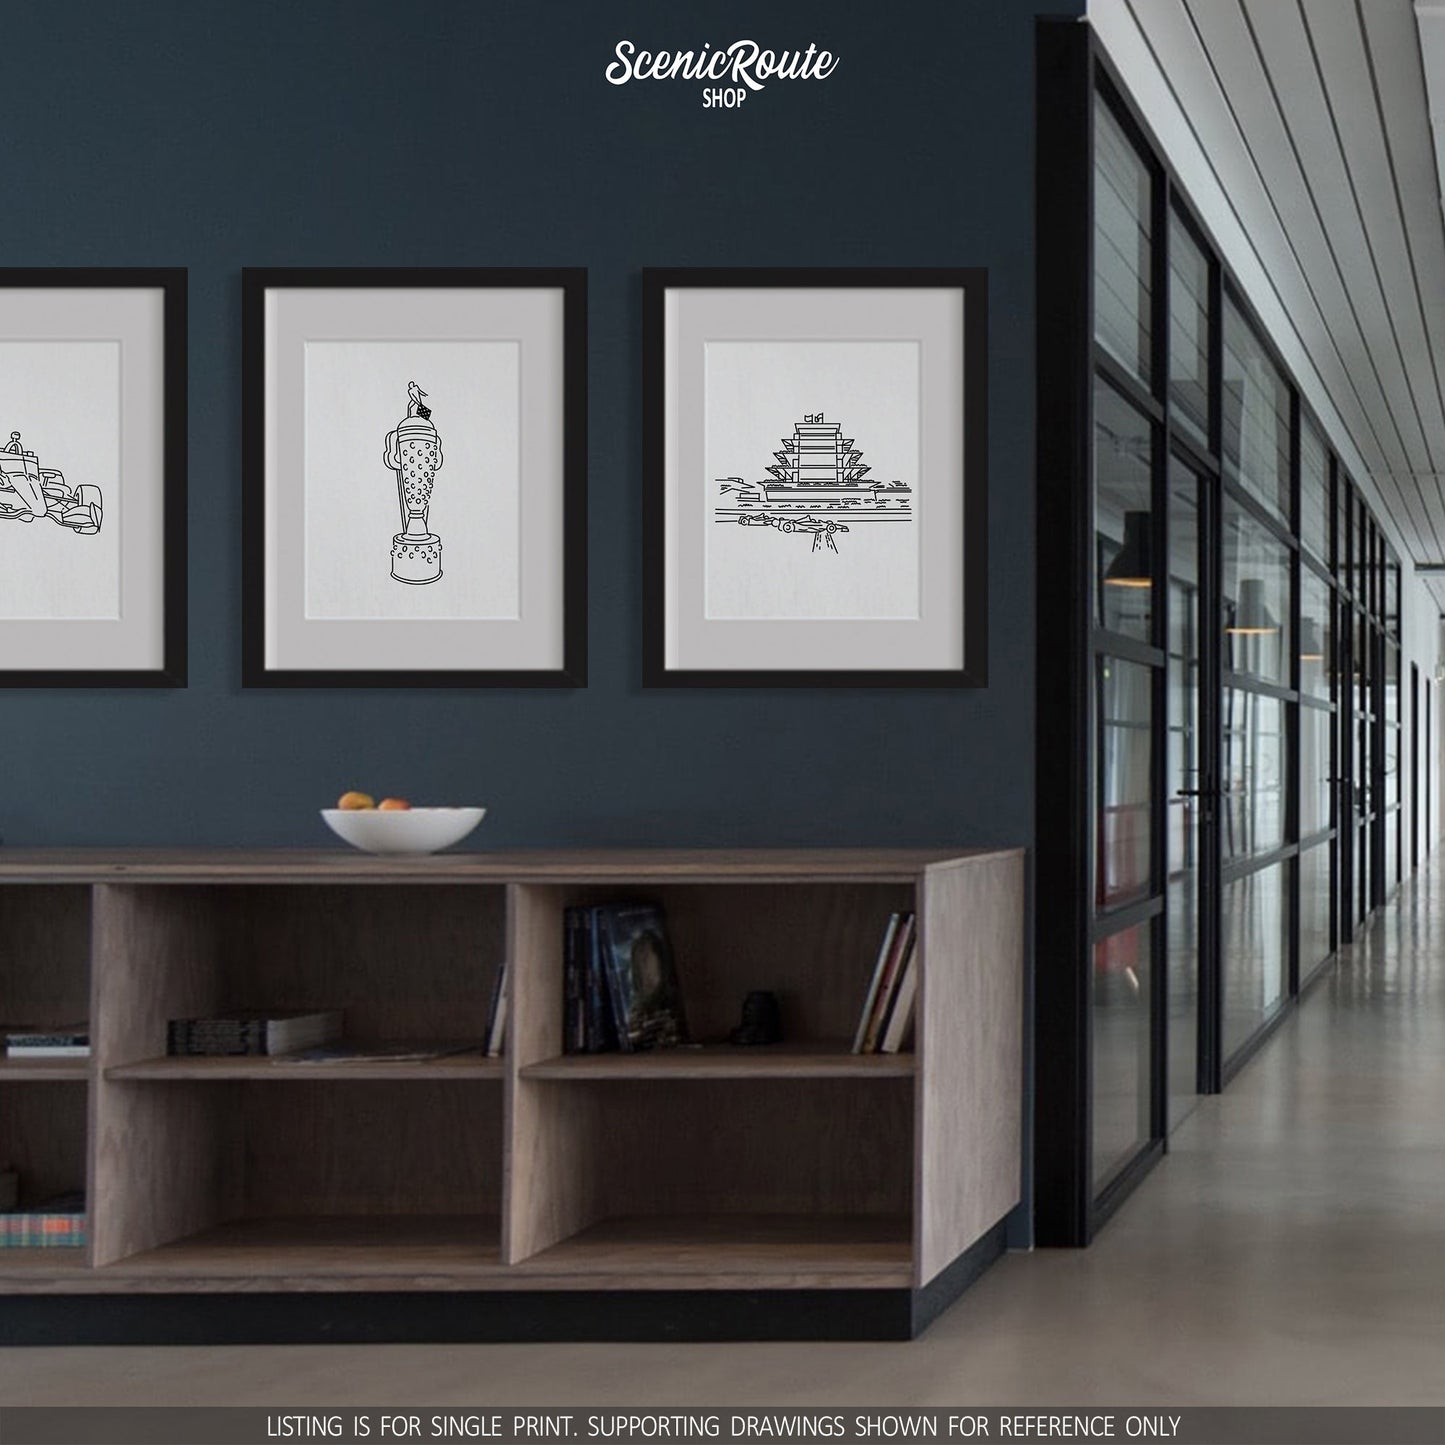 A group of three framed drawings on the wall above a cabinet in a modern office. The line art drawings include an Indy Car, the Indy Car Borg Warner Trophy, and the Speedway Pagoda